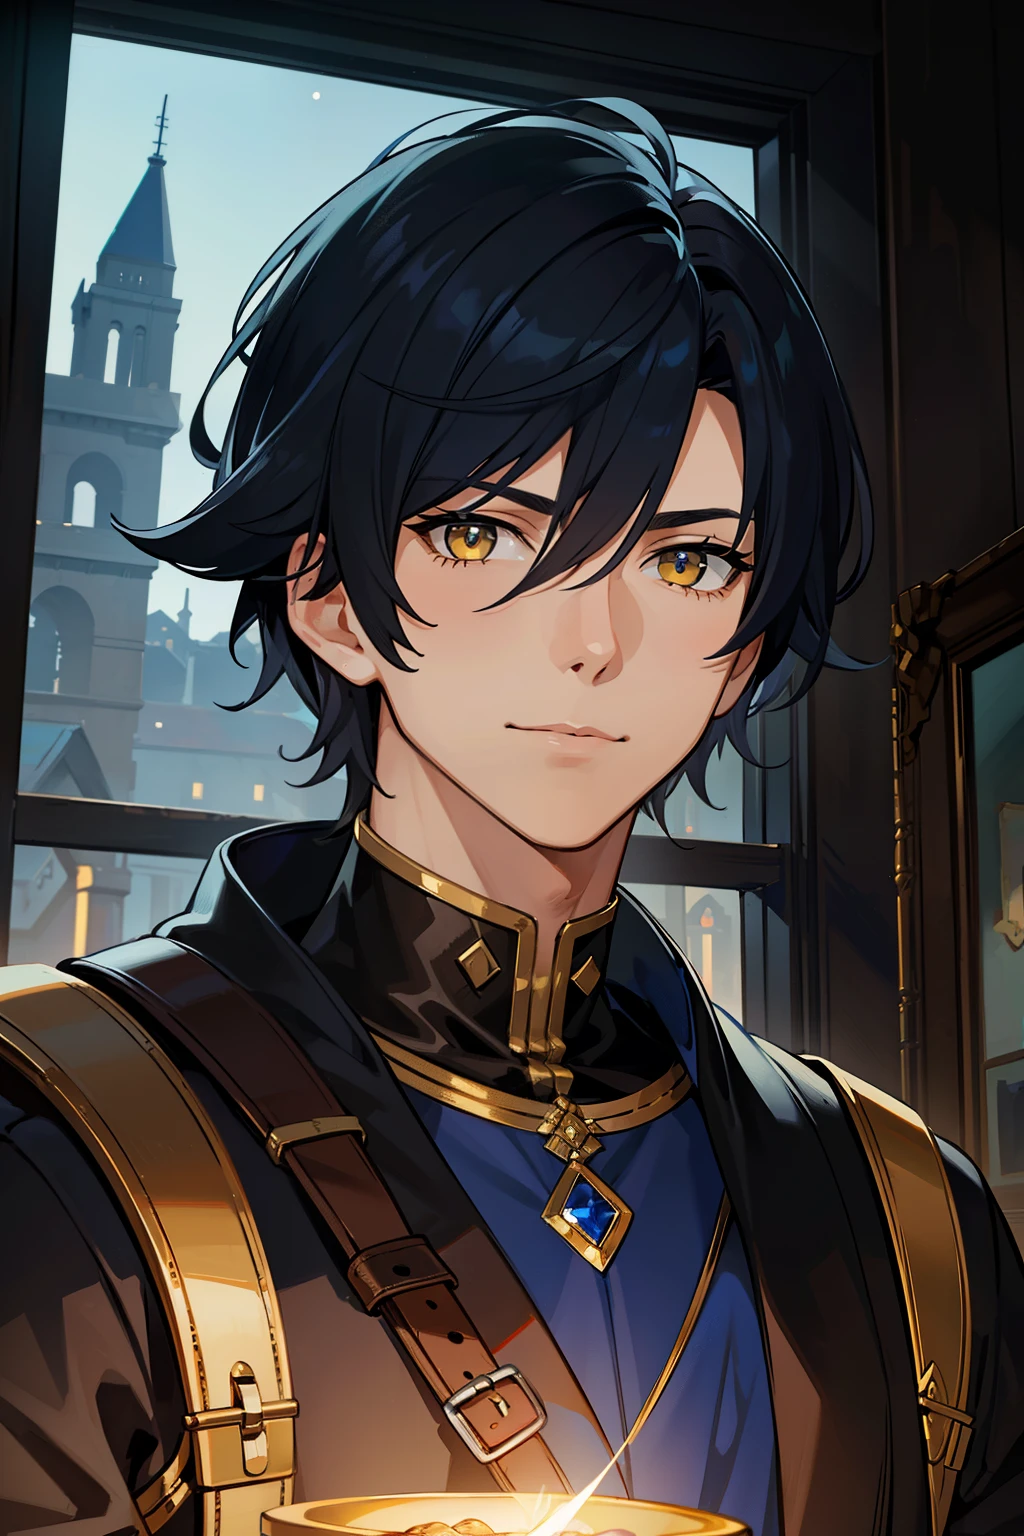 (high-quality, breathtaking),(expressive eyes, perfect face) portrait, 1male, male, solo, adult man, age late 20's, black hair, yellow golden eye color, short hair length, soft wavy hair, spiky hair, gentle smile, side bangs, looking at viewer, portrait, happy expression, fantasy clothing, blacksmith, blacksmith clothing, blacksmith profession, elegant, mature, height 5"6, blue lighting in hair, blue trim